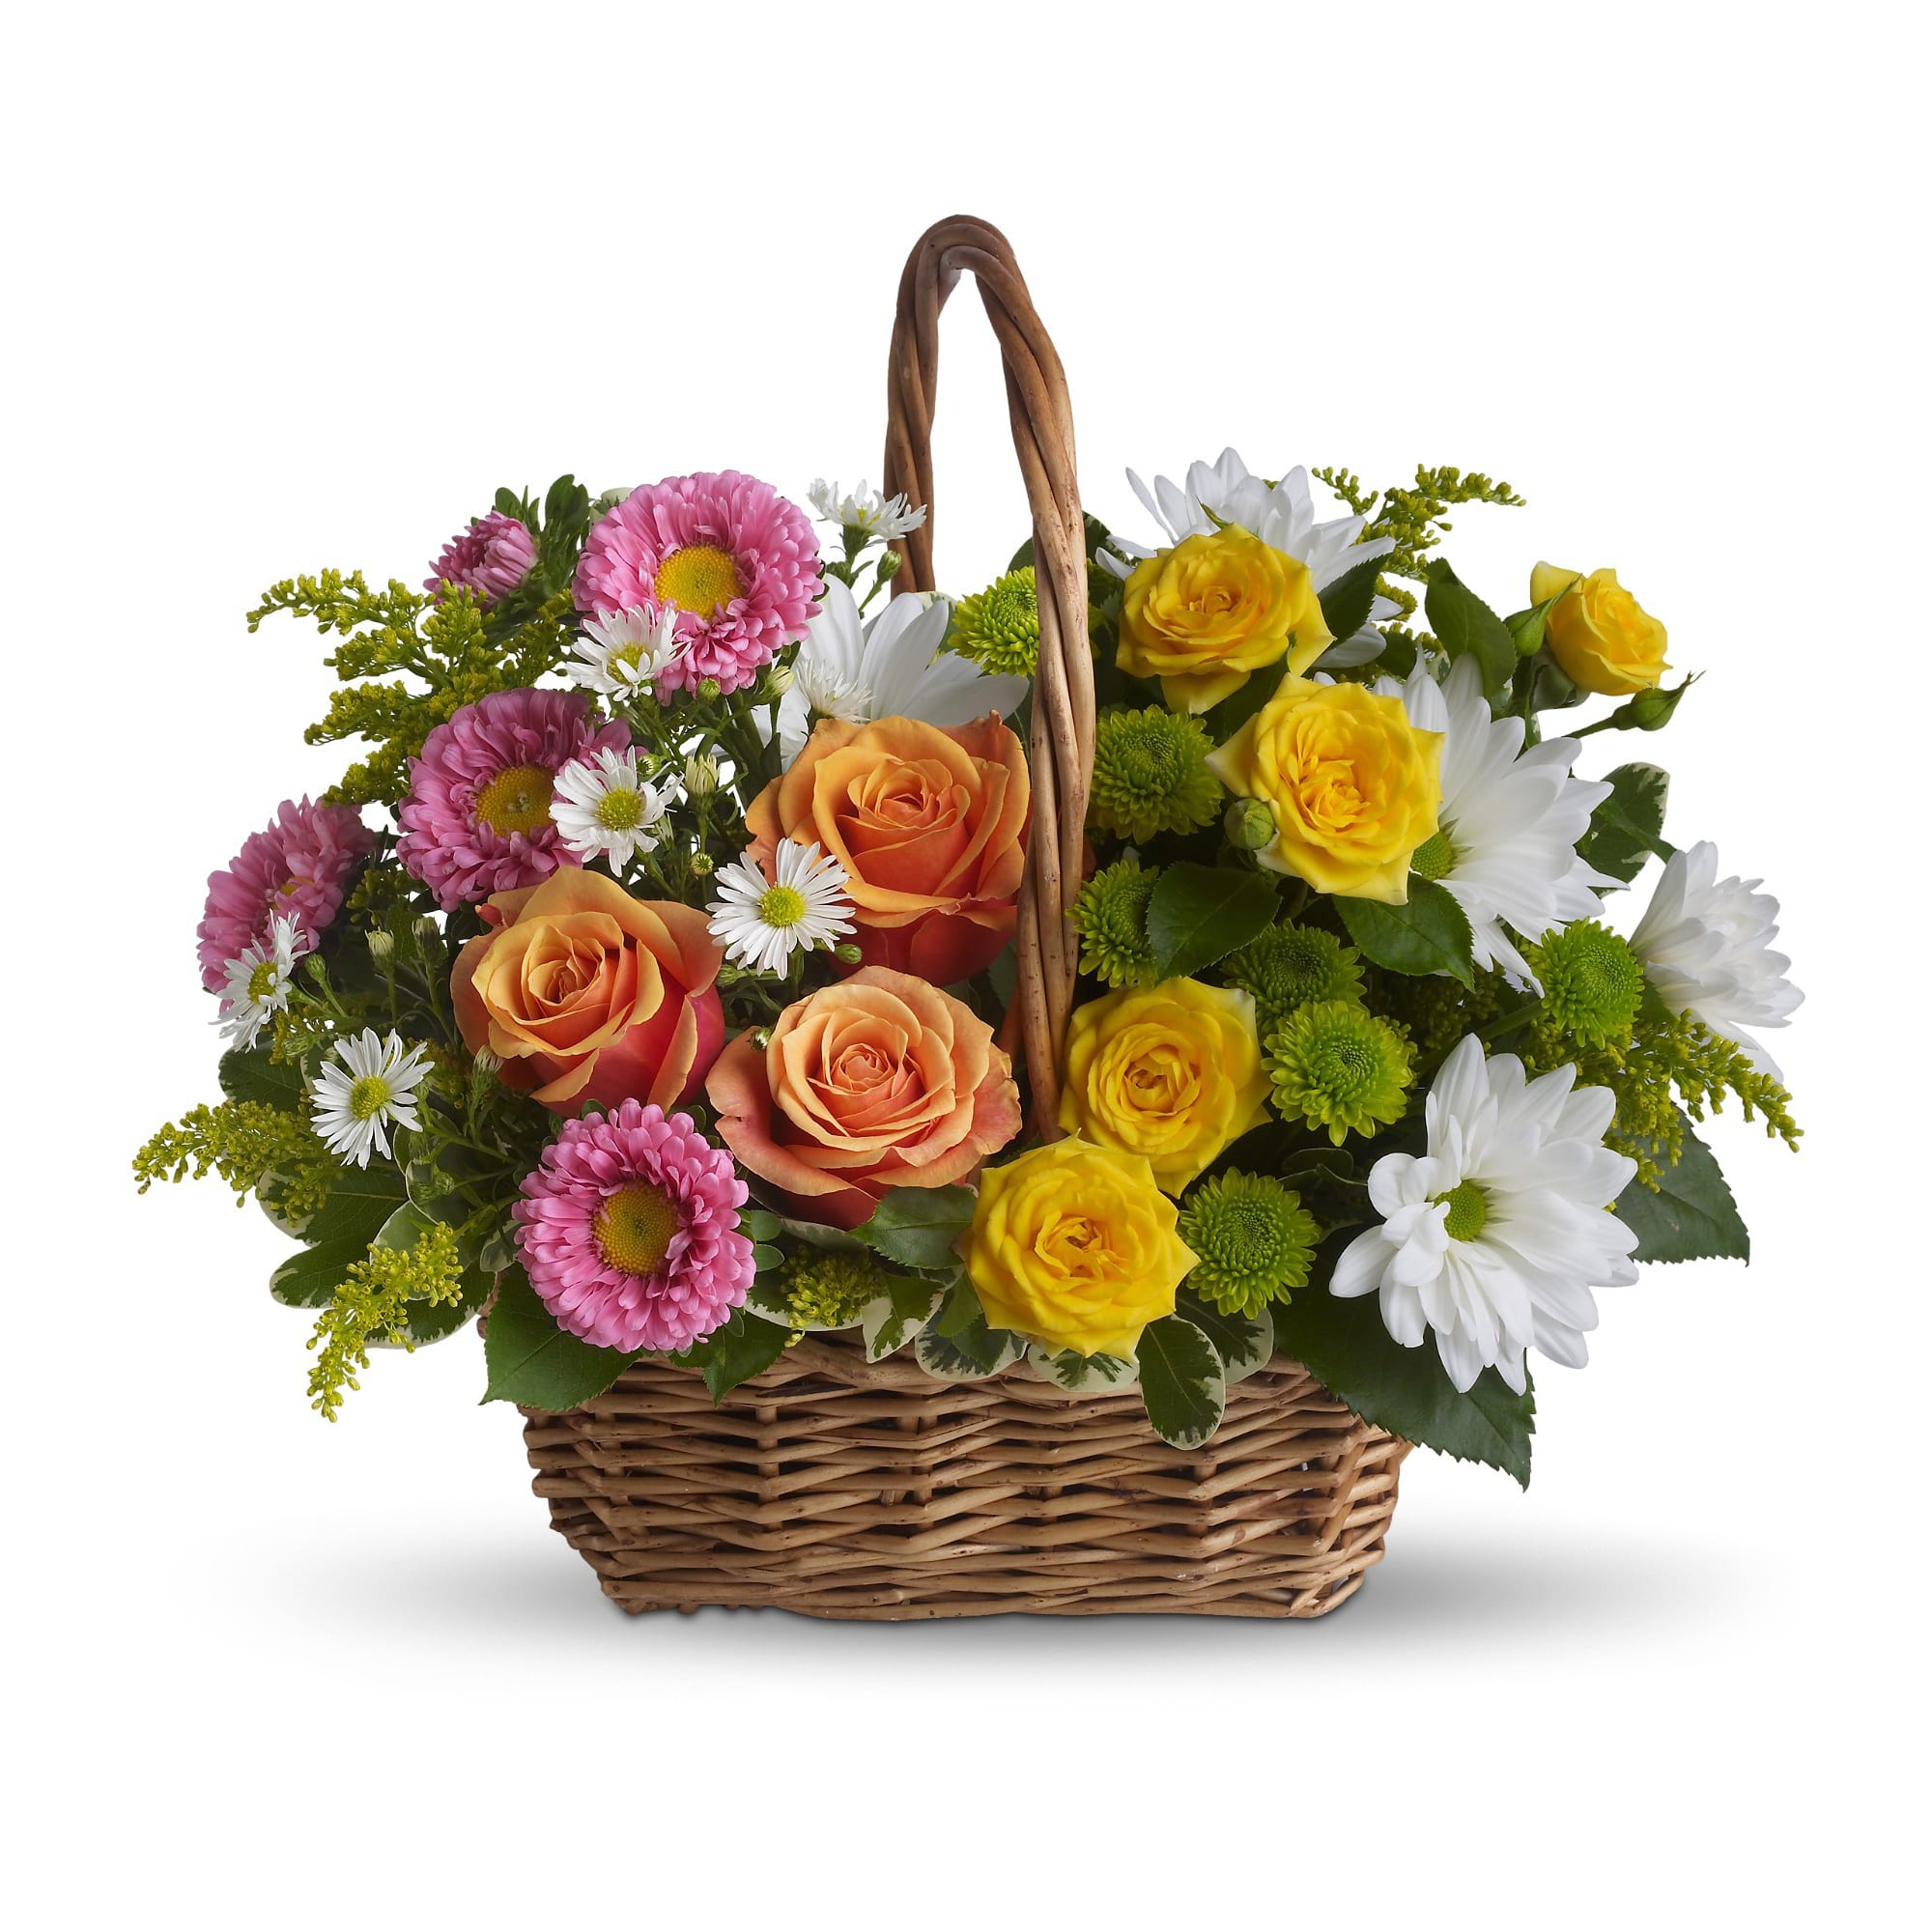 Sweet Tranquility Basket  - A basket full of bright blossoms will deliver the warmth of sunshine even when the skies seem gray. This beautiful gift will be appreciated for its life-affirming brilliance and your thoughtfulness at this time. 